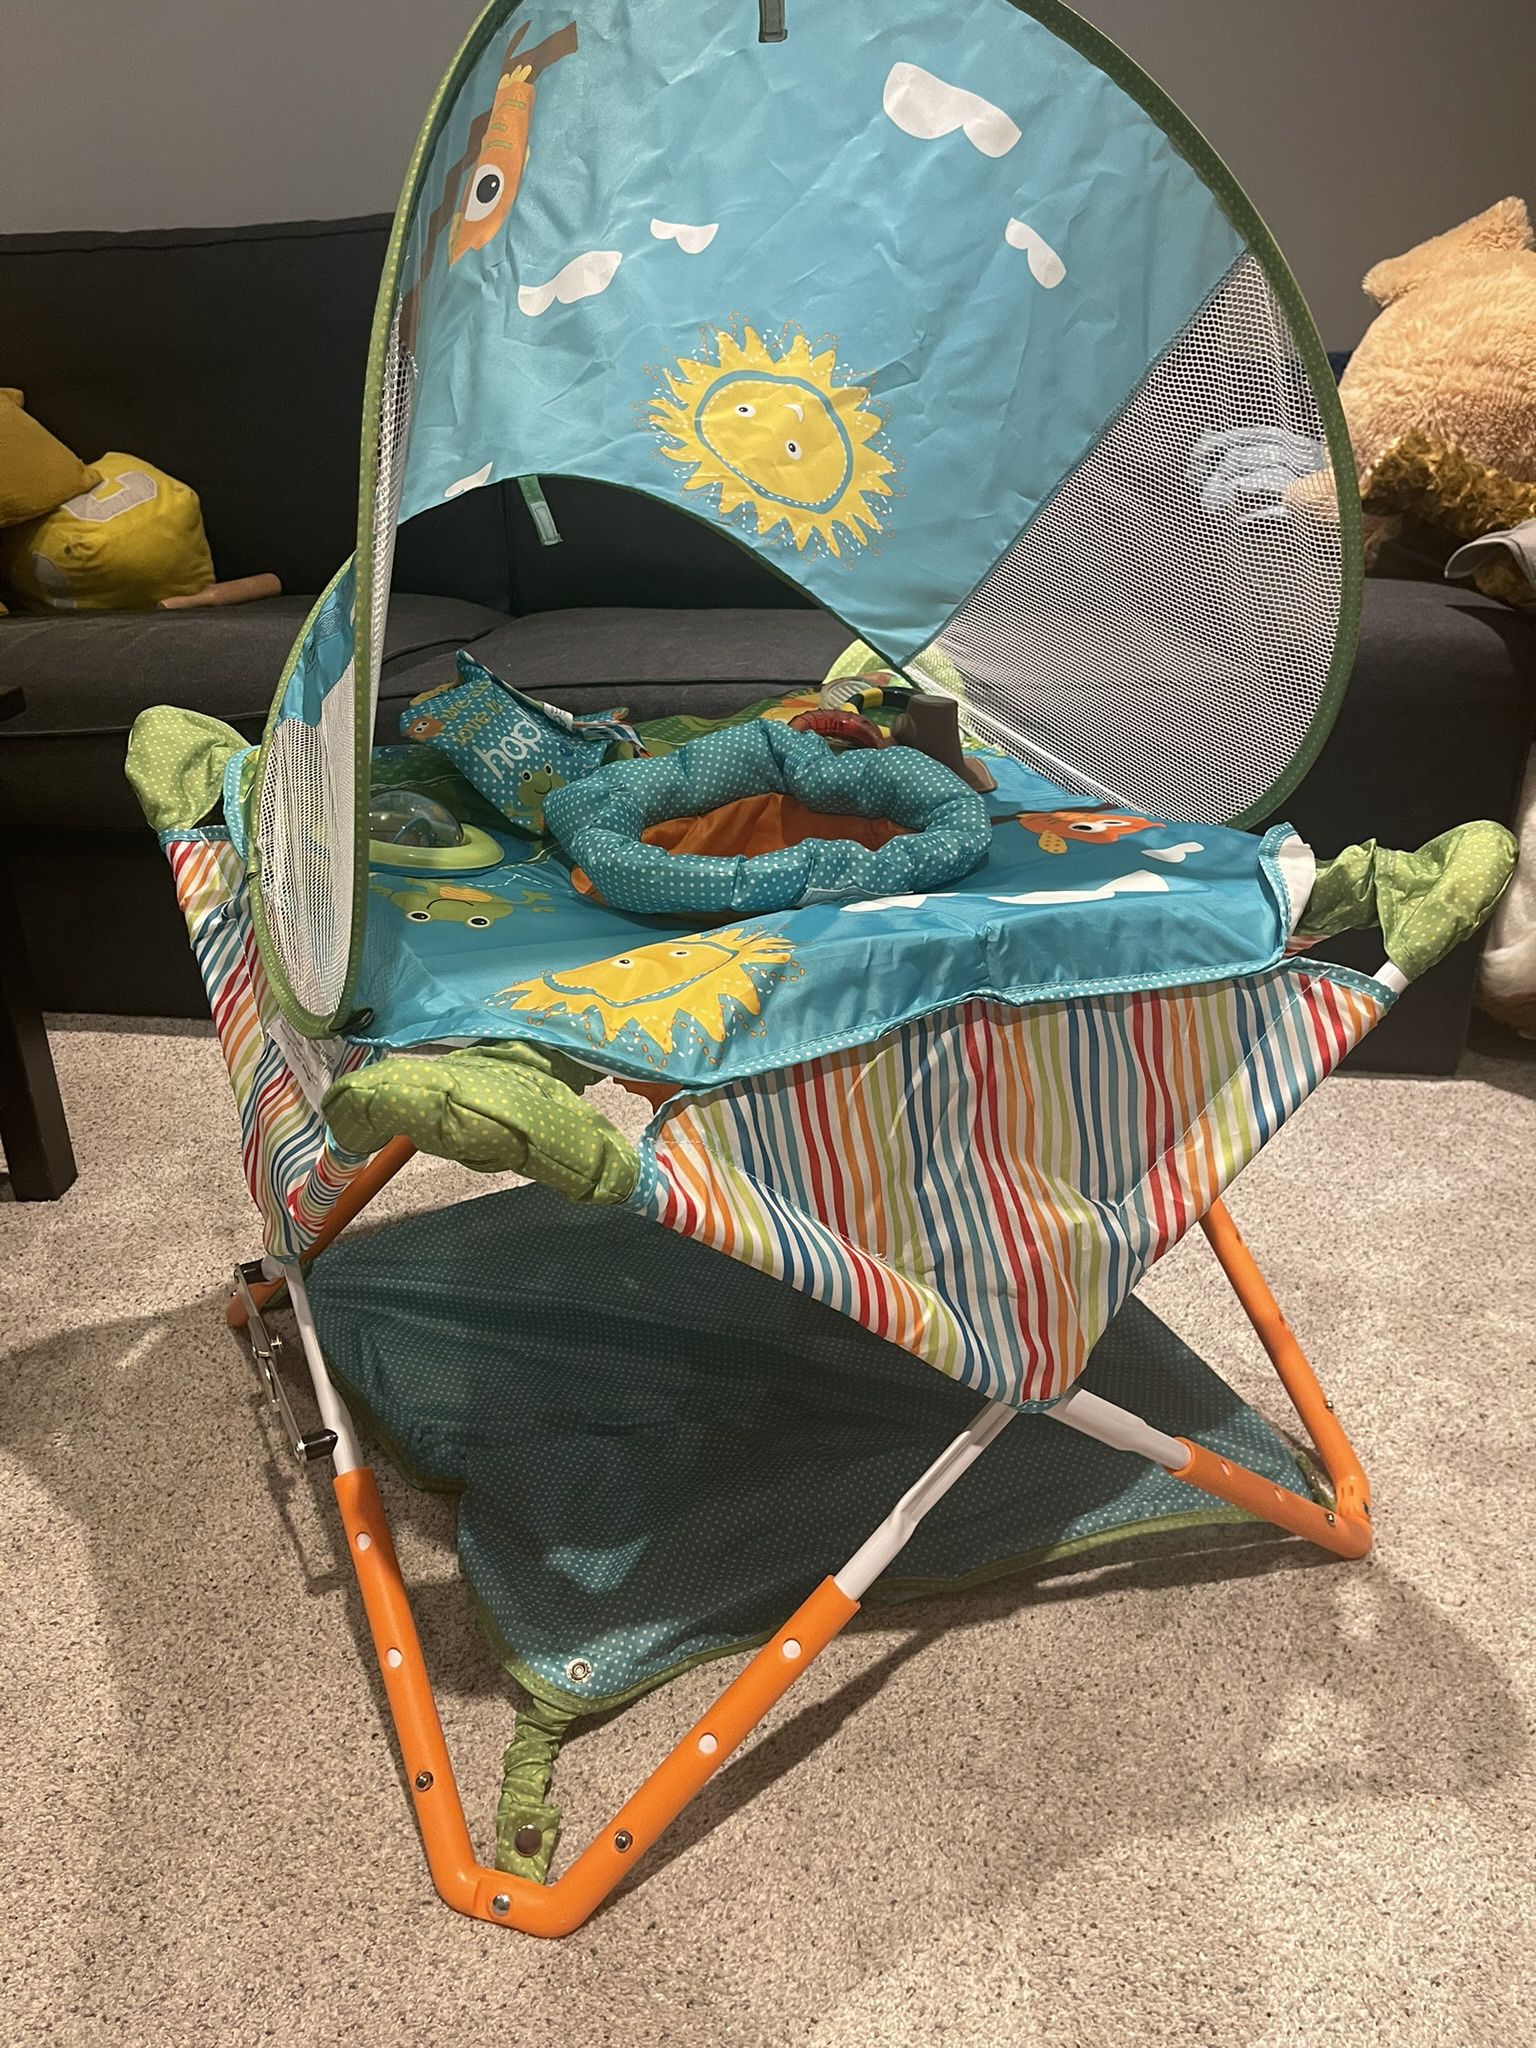 Pop-Up Baby Bouncer Activity Chair Sunshade